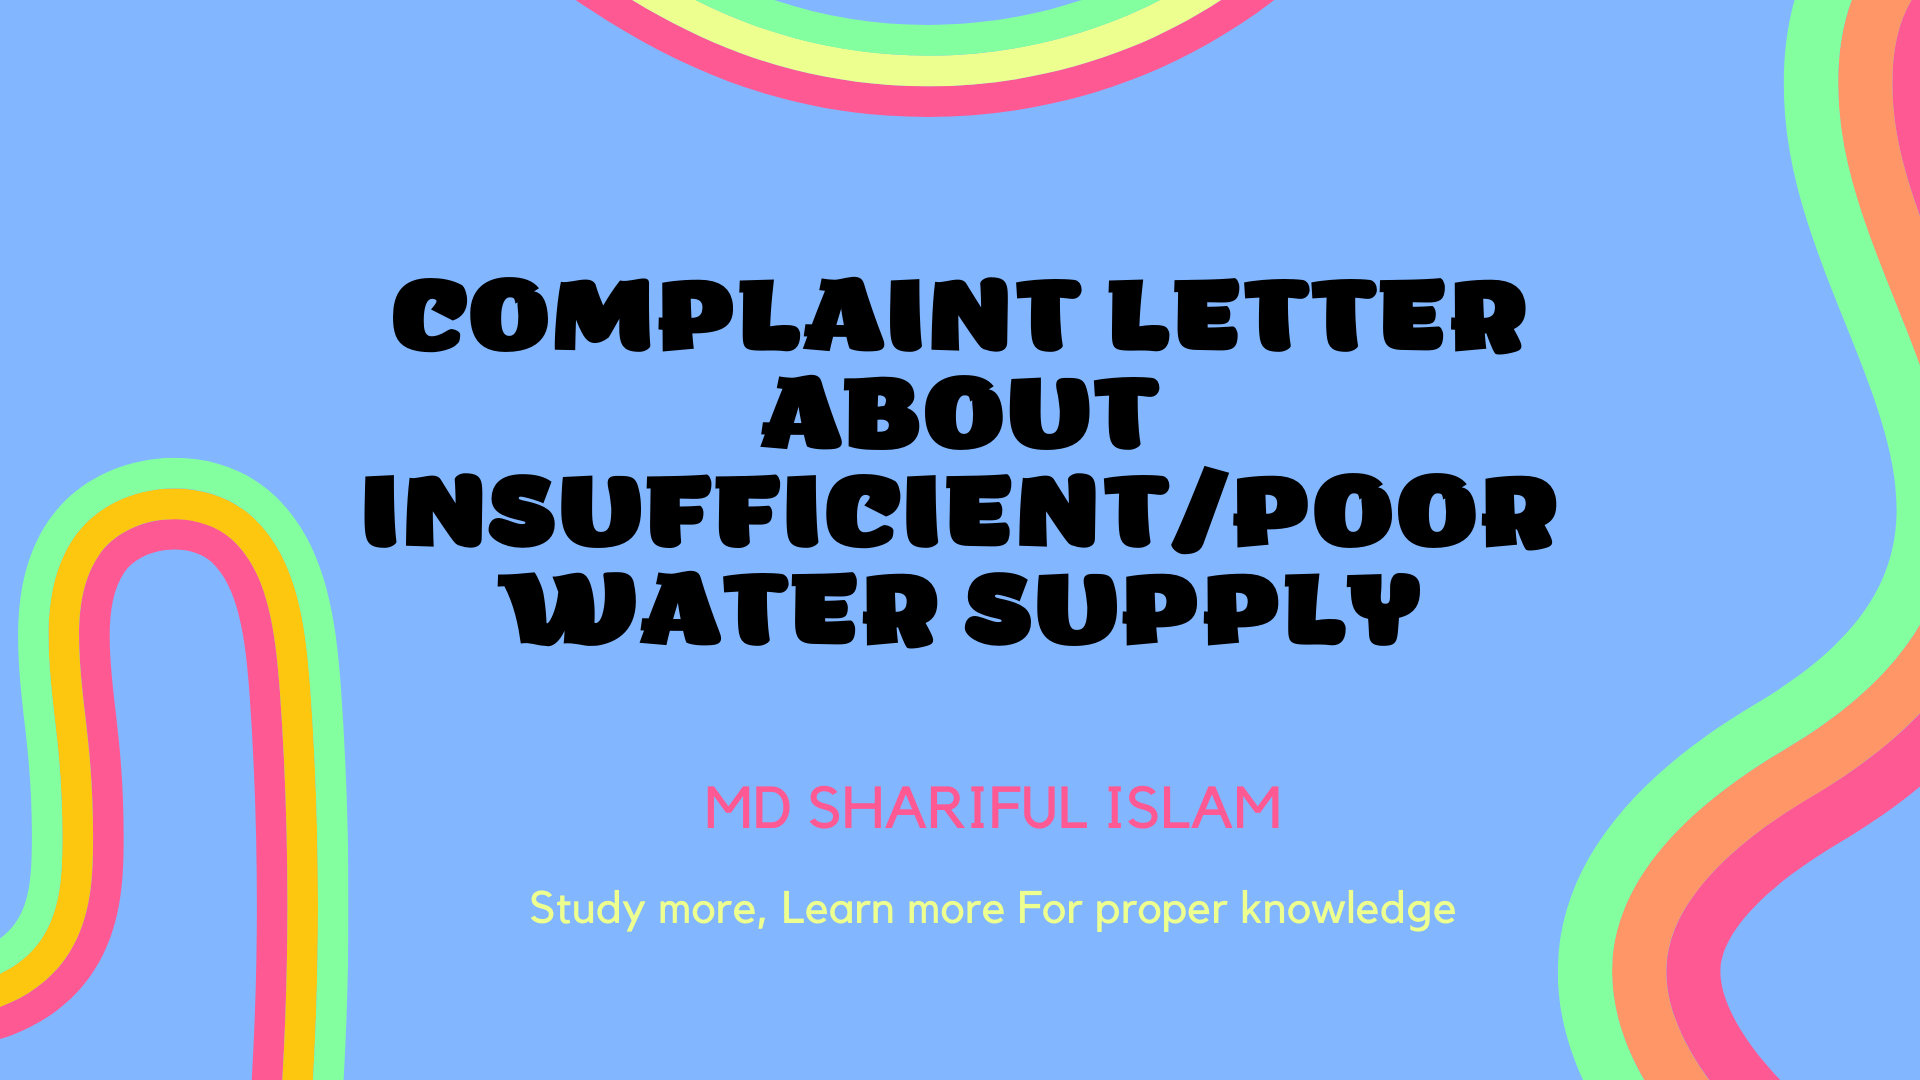 Complaint letter about insufficient/poor water supply